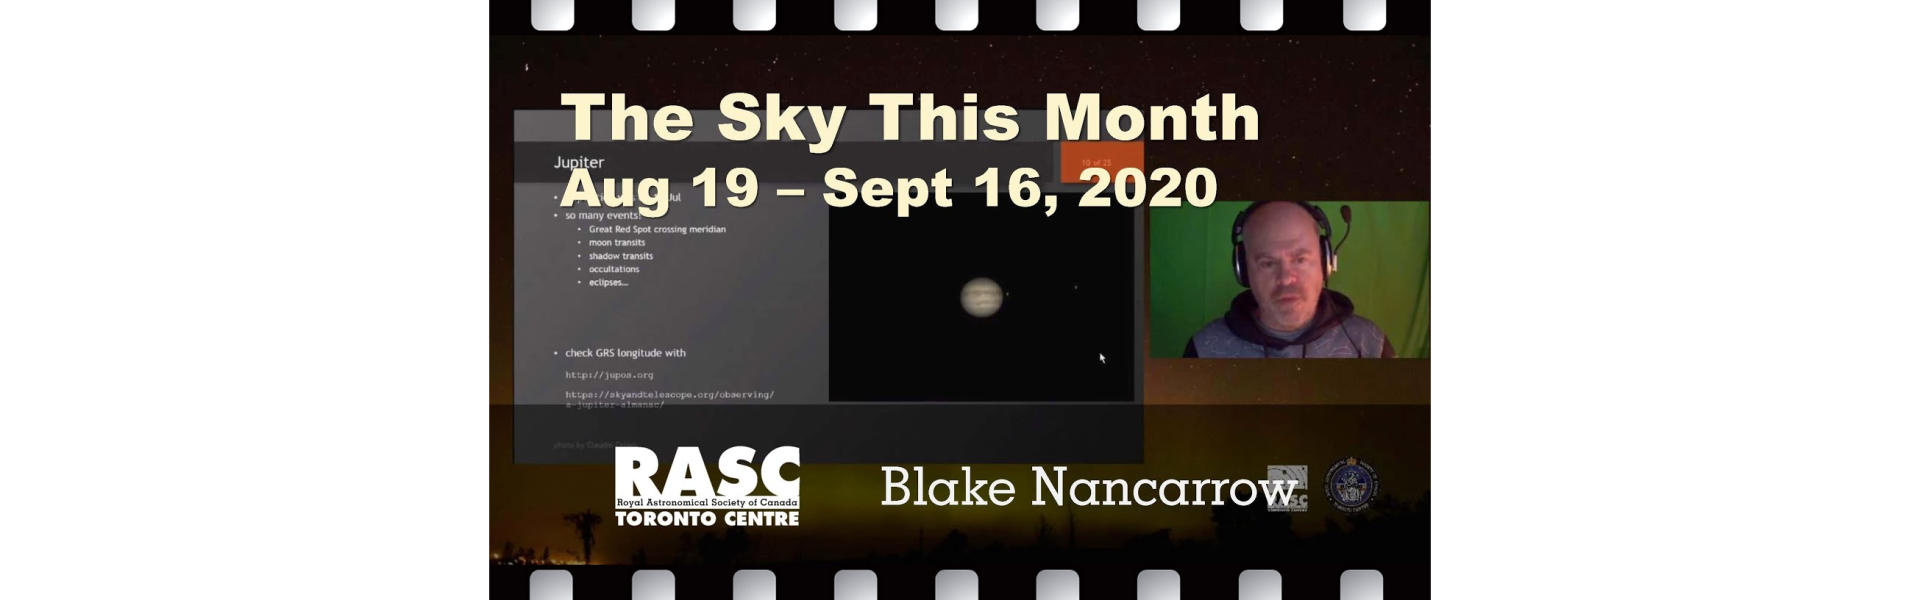 The Sky This Month Aug 19 - Sept 16, 2020